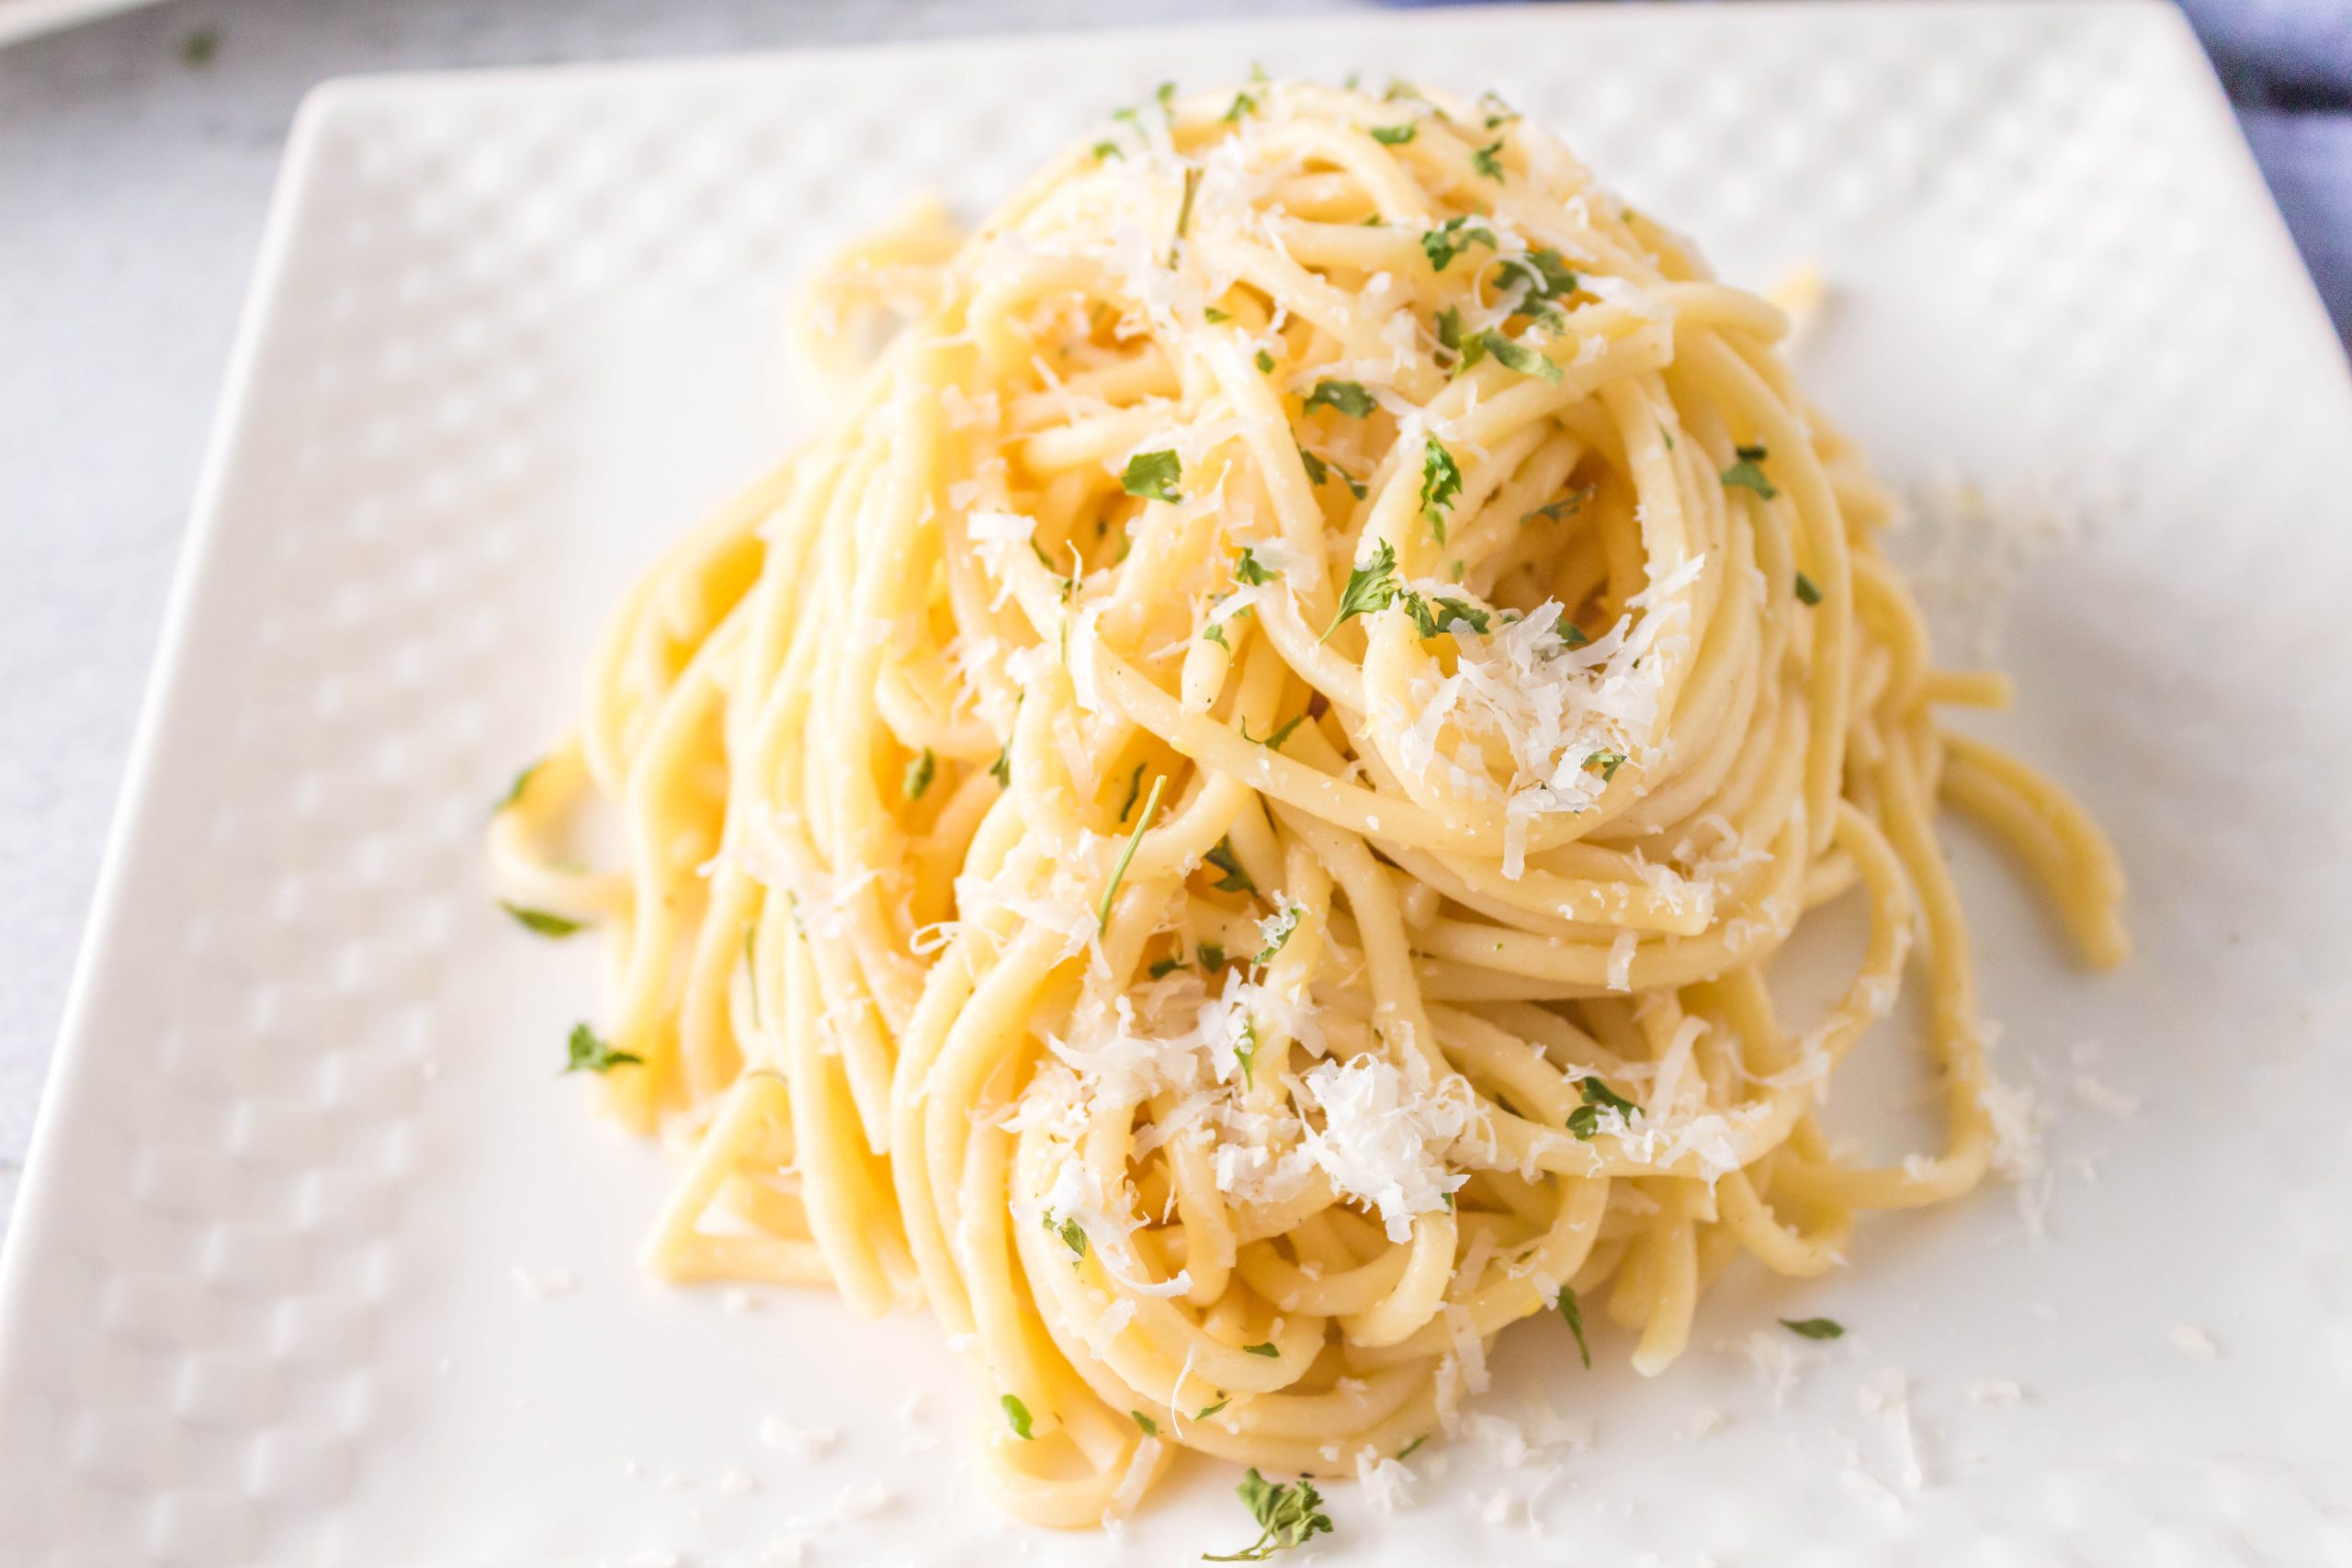 A fast and easy plate of pasta with parmesan cheese and parsley.